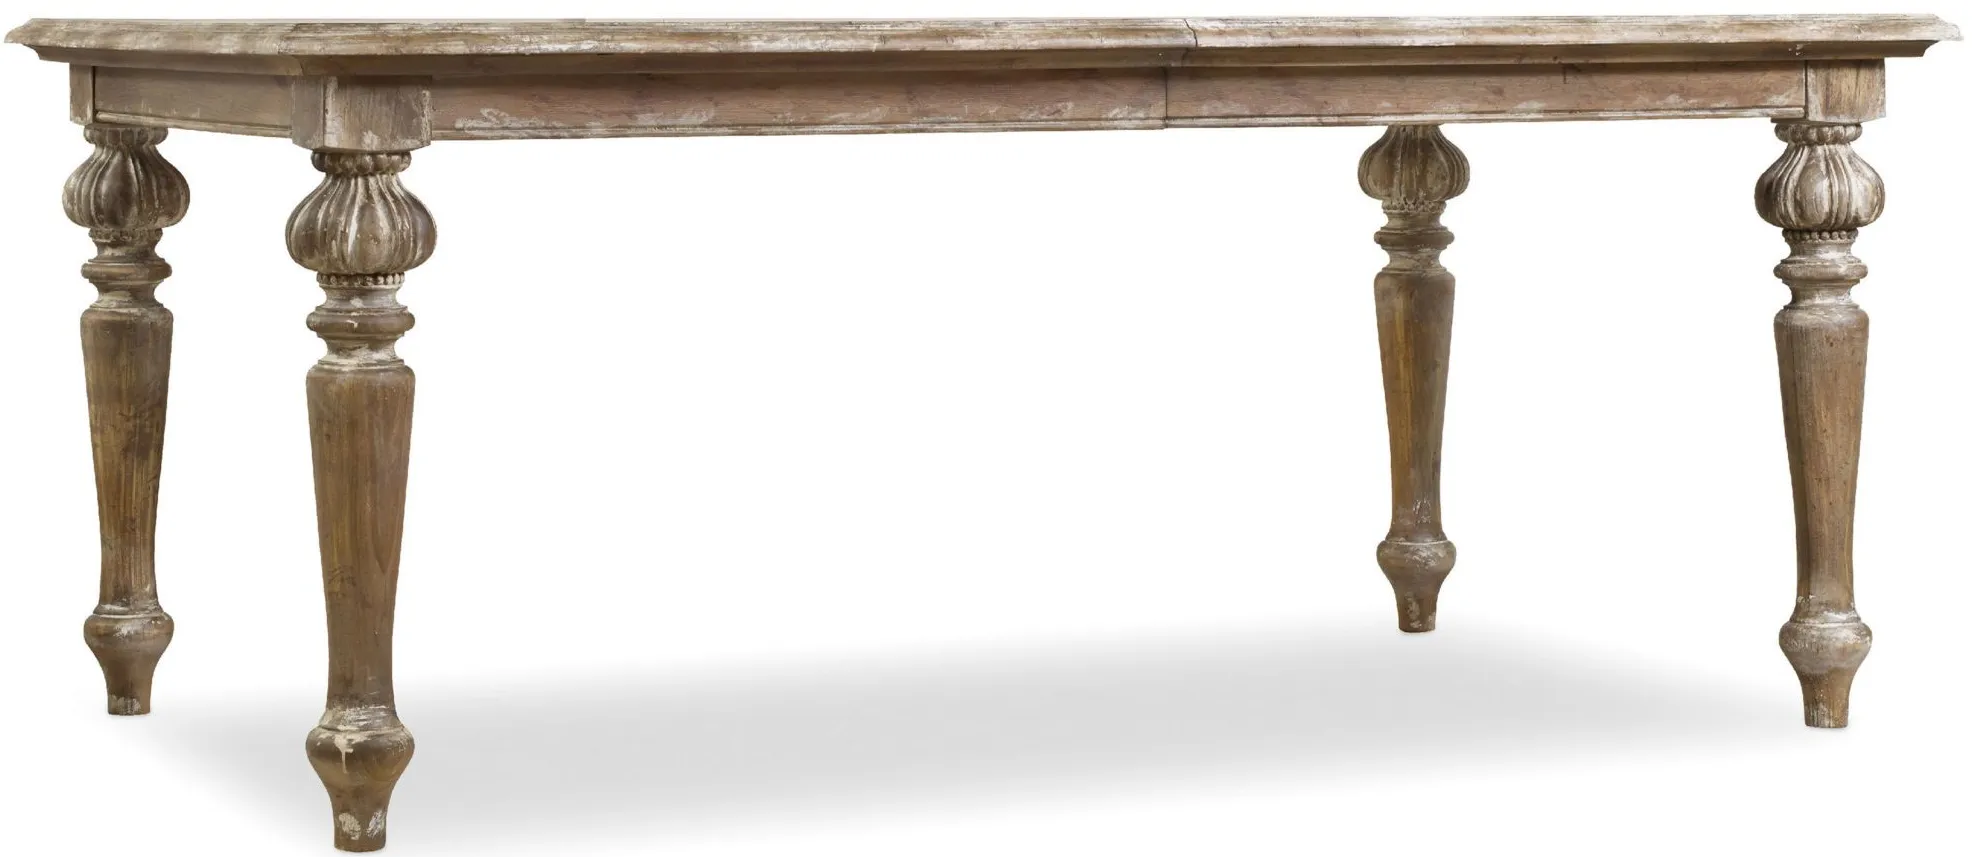 Chatelet Rectangular Dining Table with Two Leaves in Pecky Pecan by Hooker Furniture